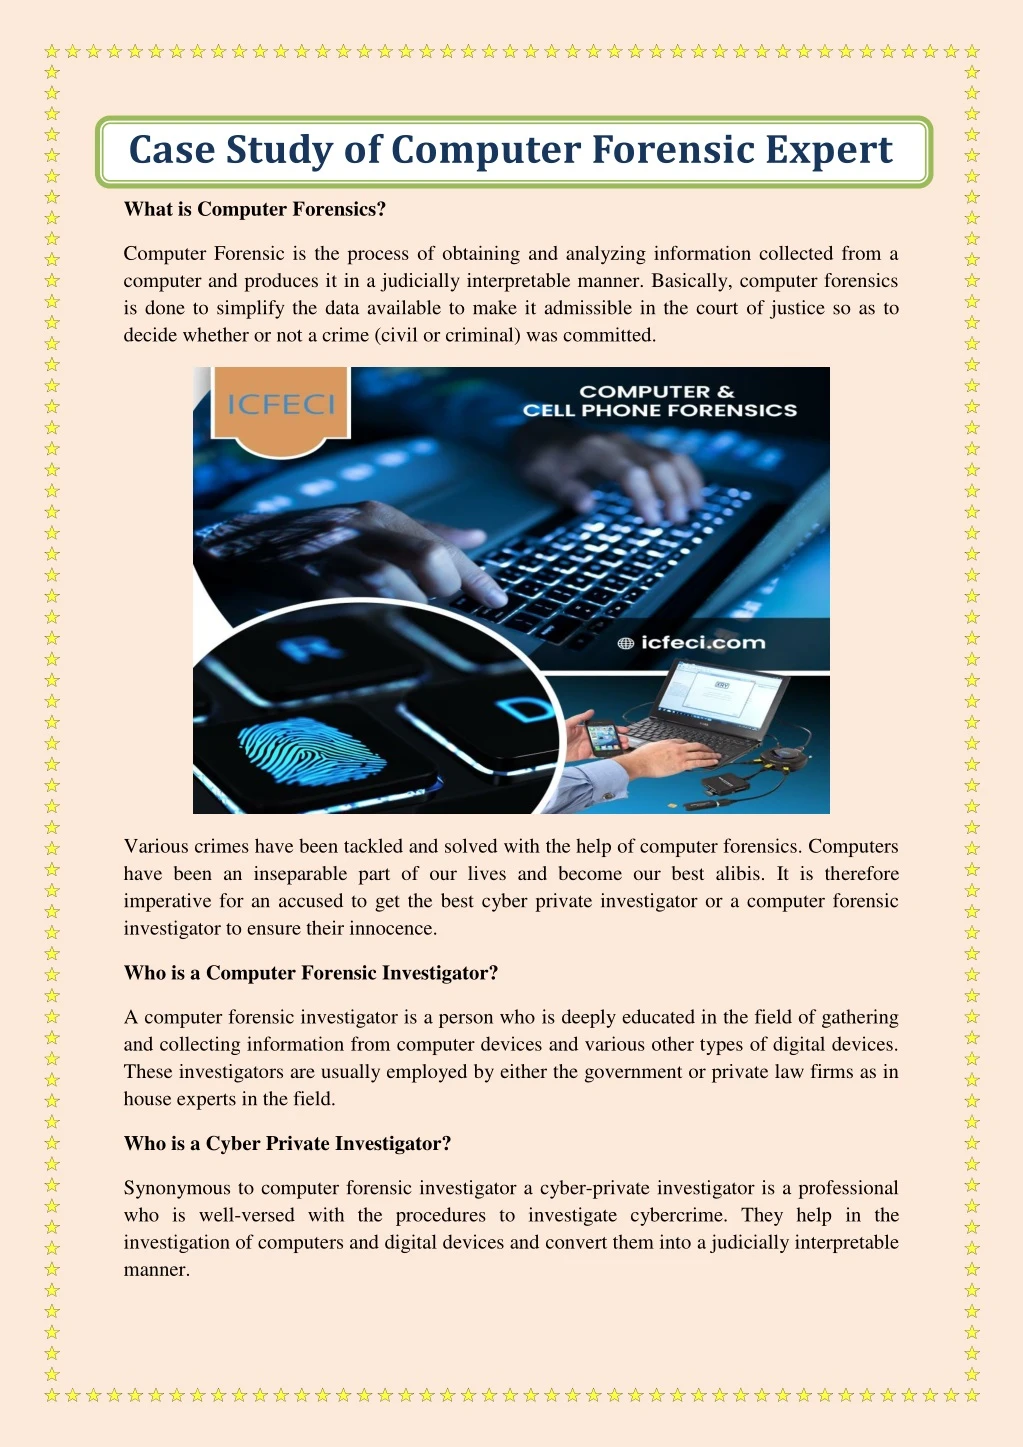 case study of computer forensic expert